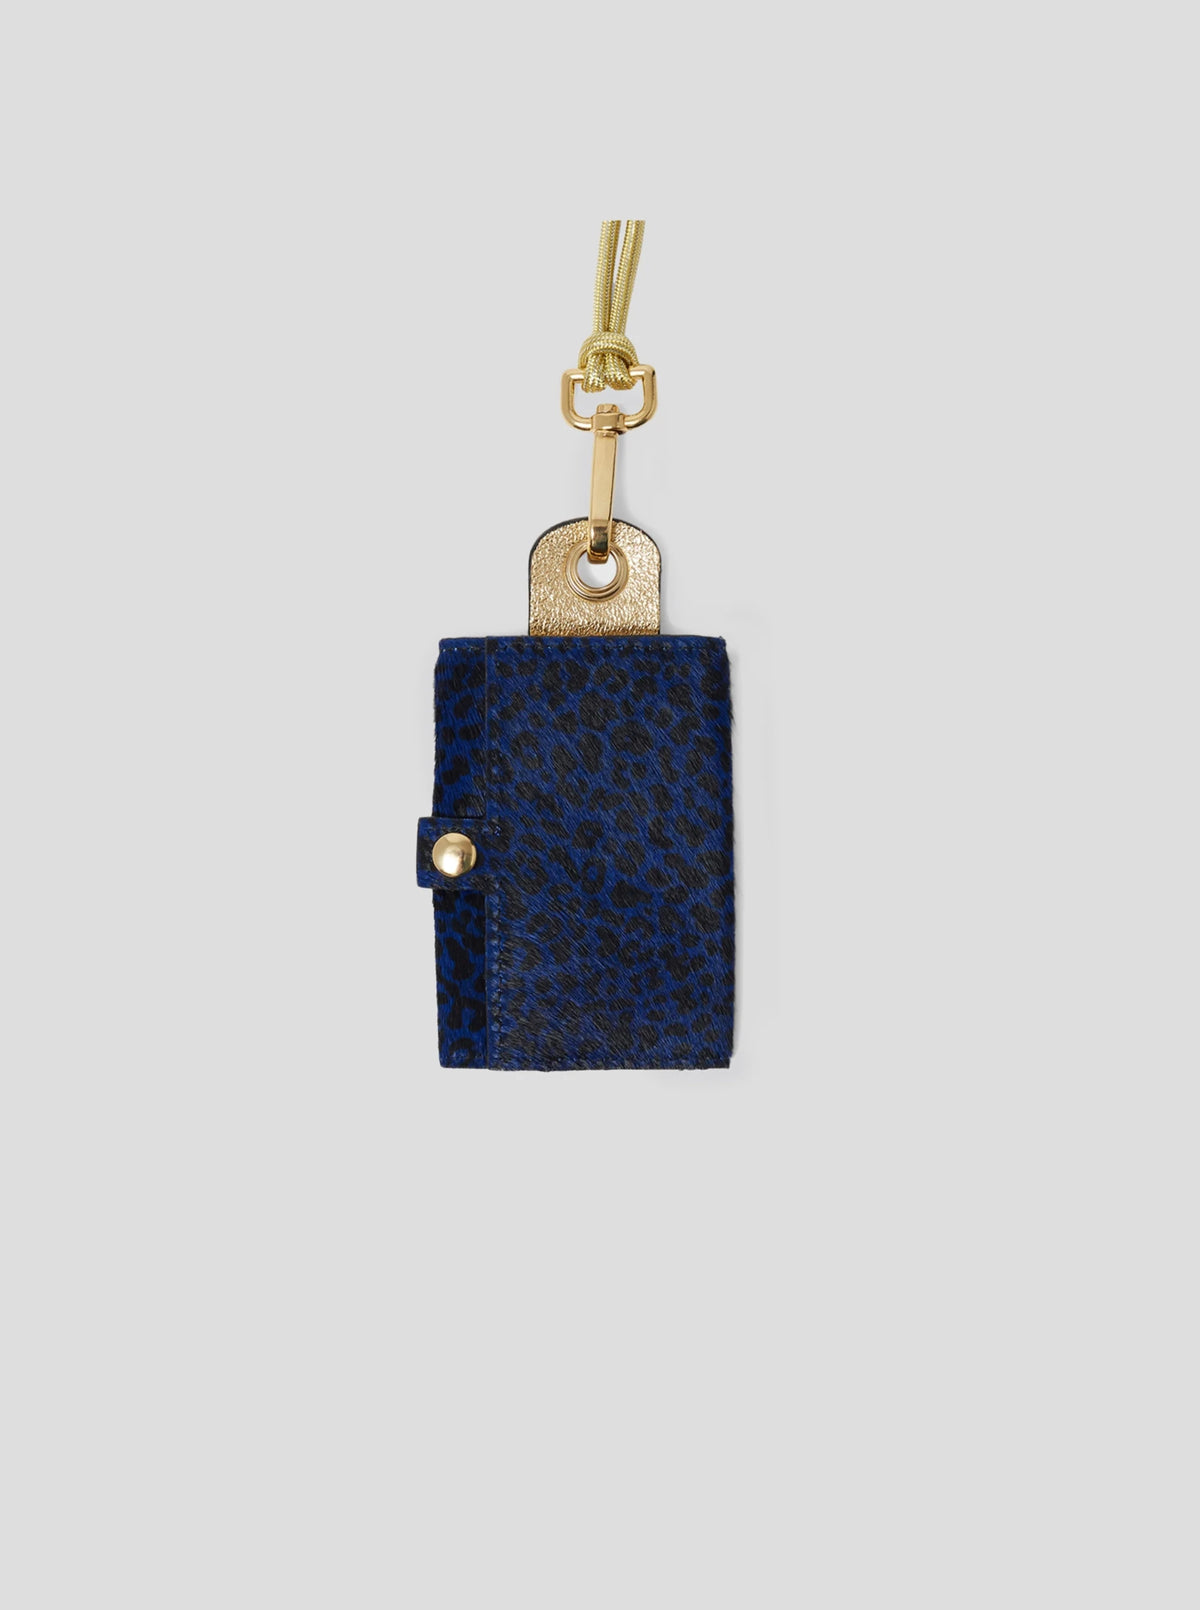 The Minis - 6 Key Holder in blue Cheetah printed leather